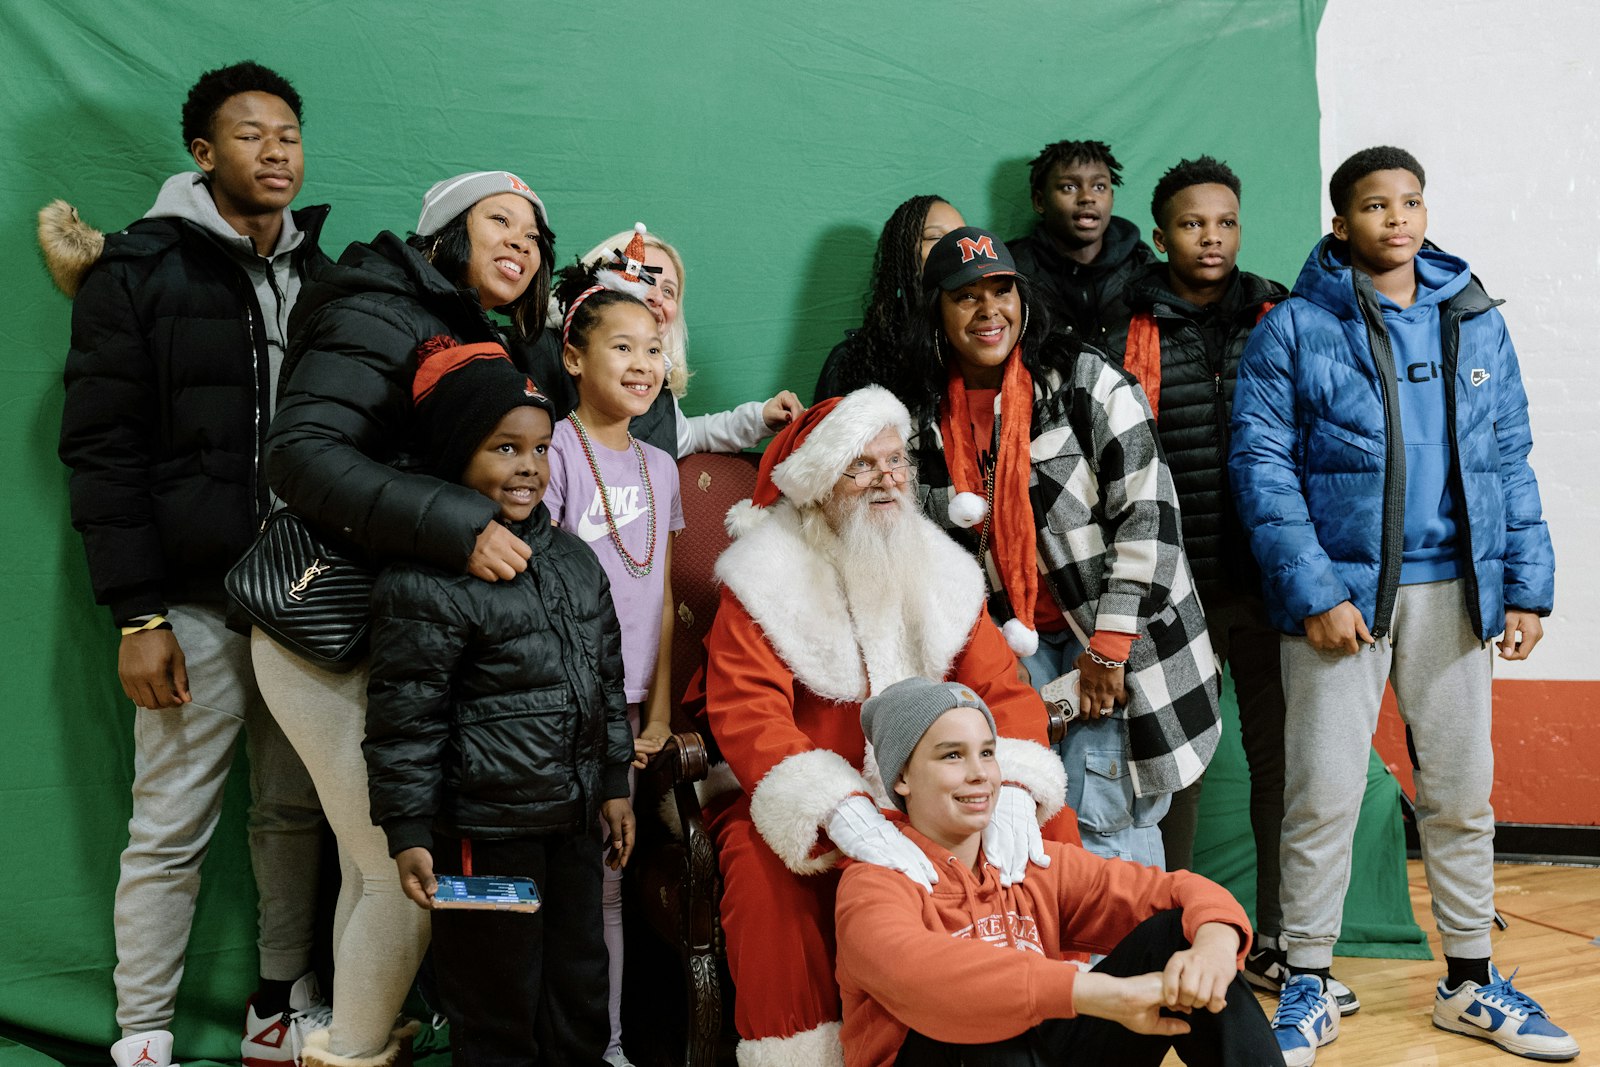 Families pose for photos with Santa Claus during the Orchard Lake Schools' annual "Mingle All the Way" celebration Nov. 19. (Alissa Tuttle | Special to Detroit Catholic)